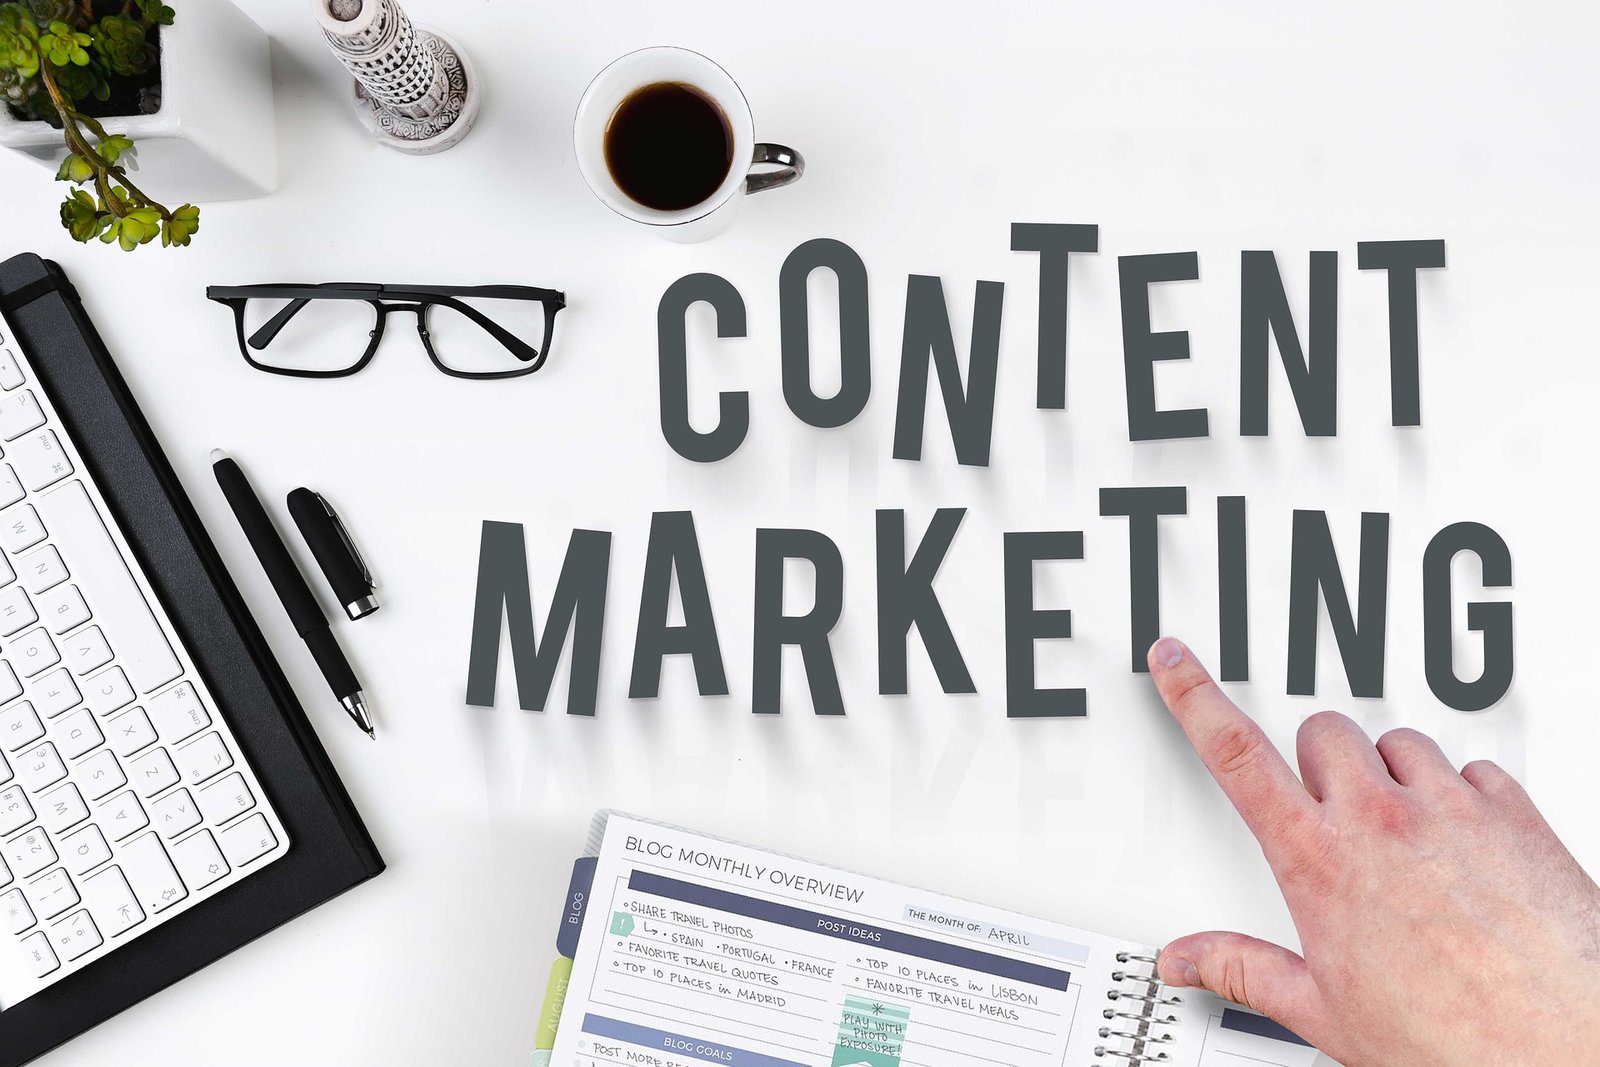 TRENDS IN CONTENT MARKETING 2020